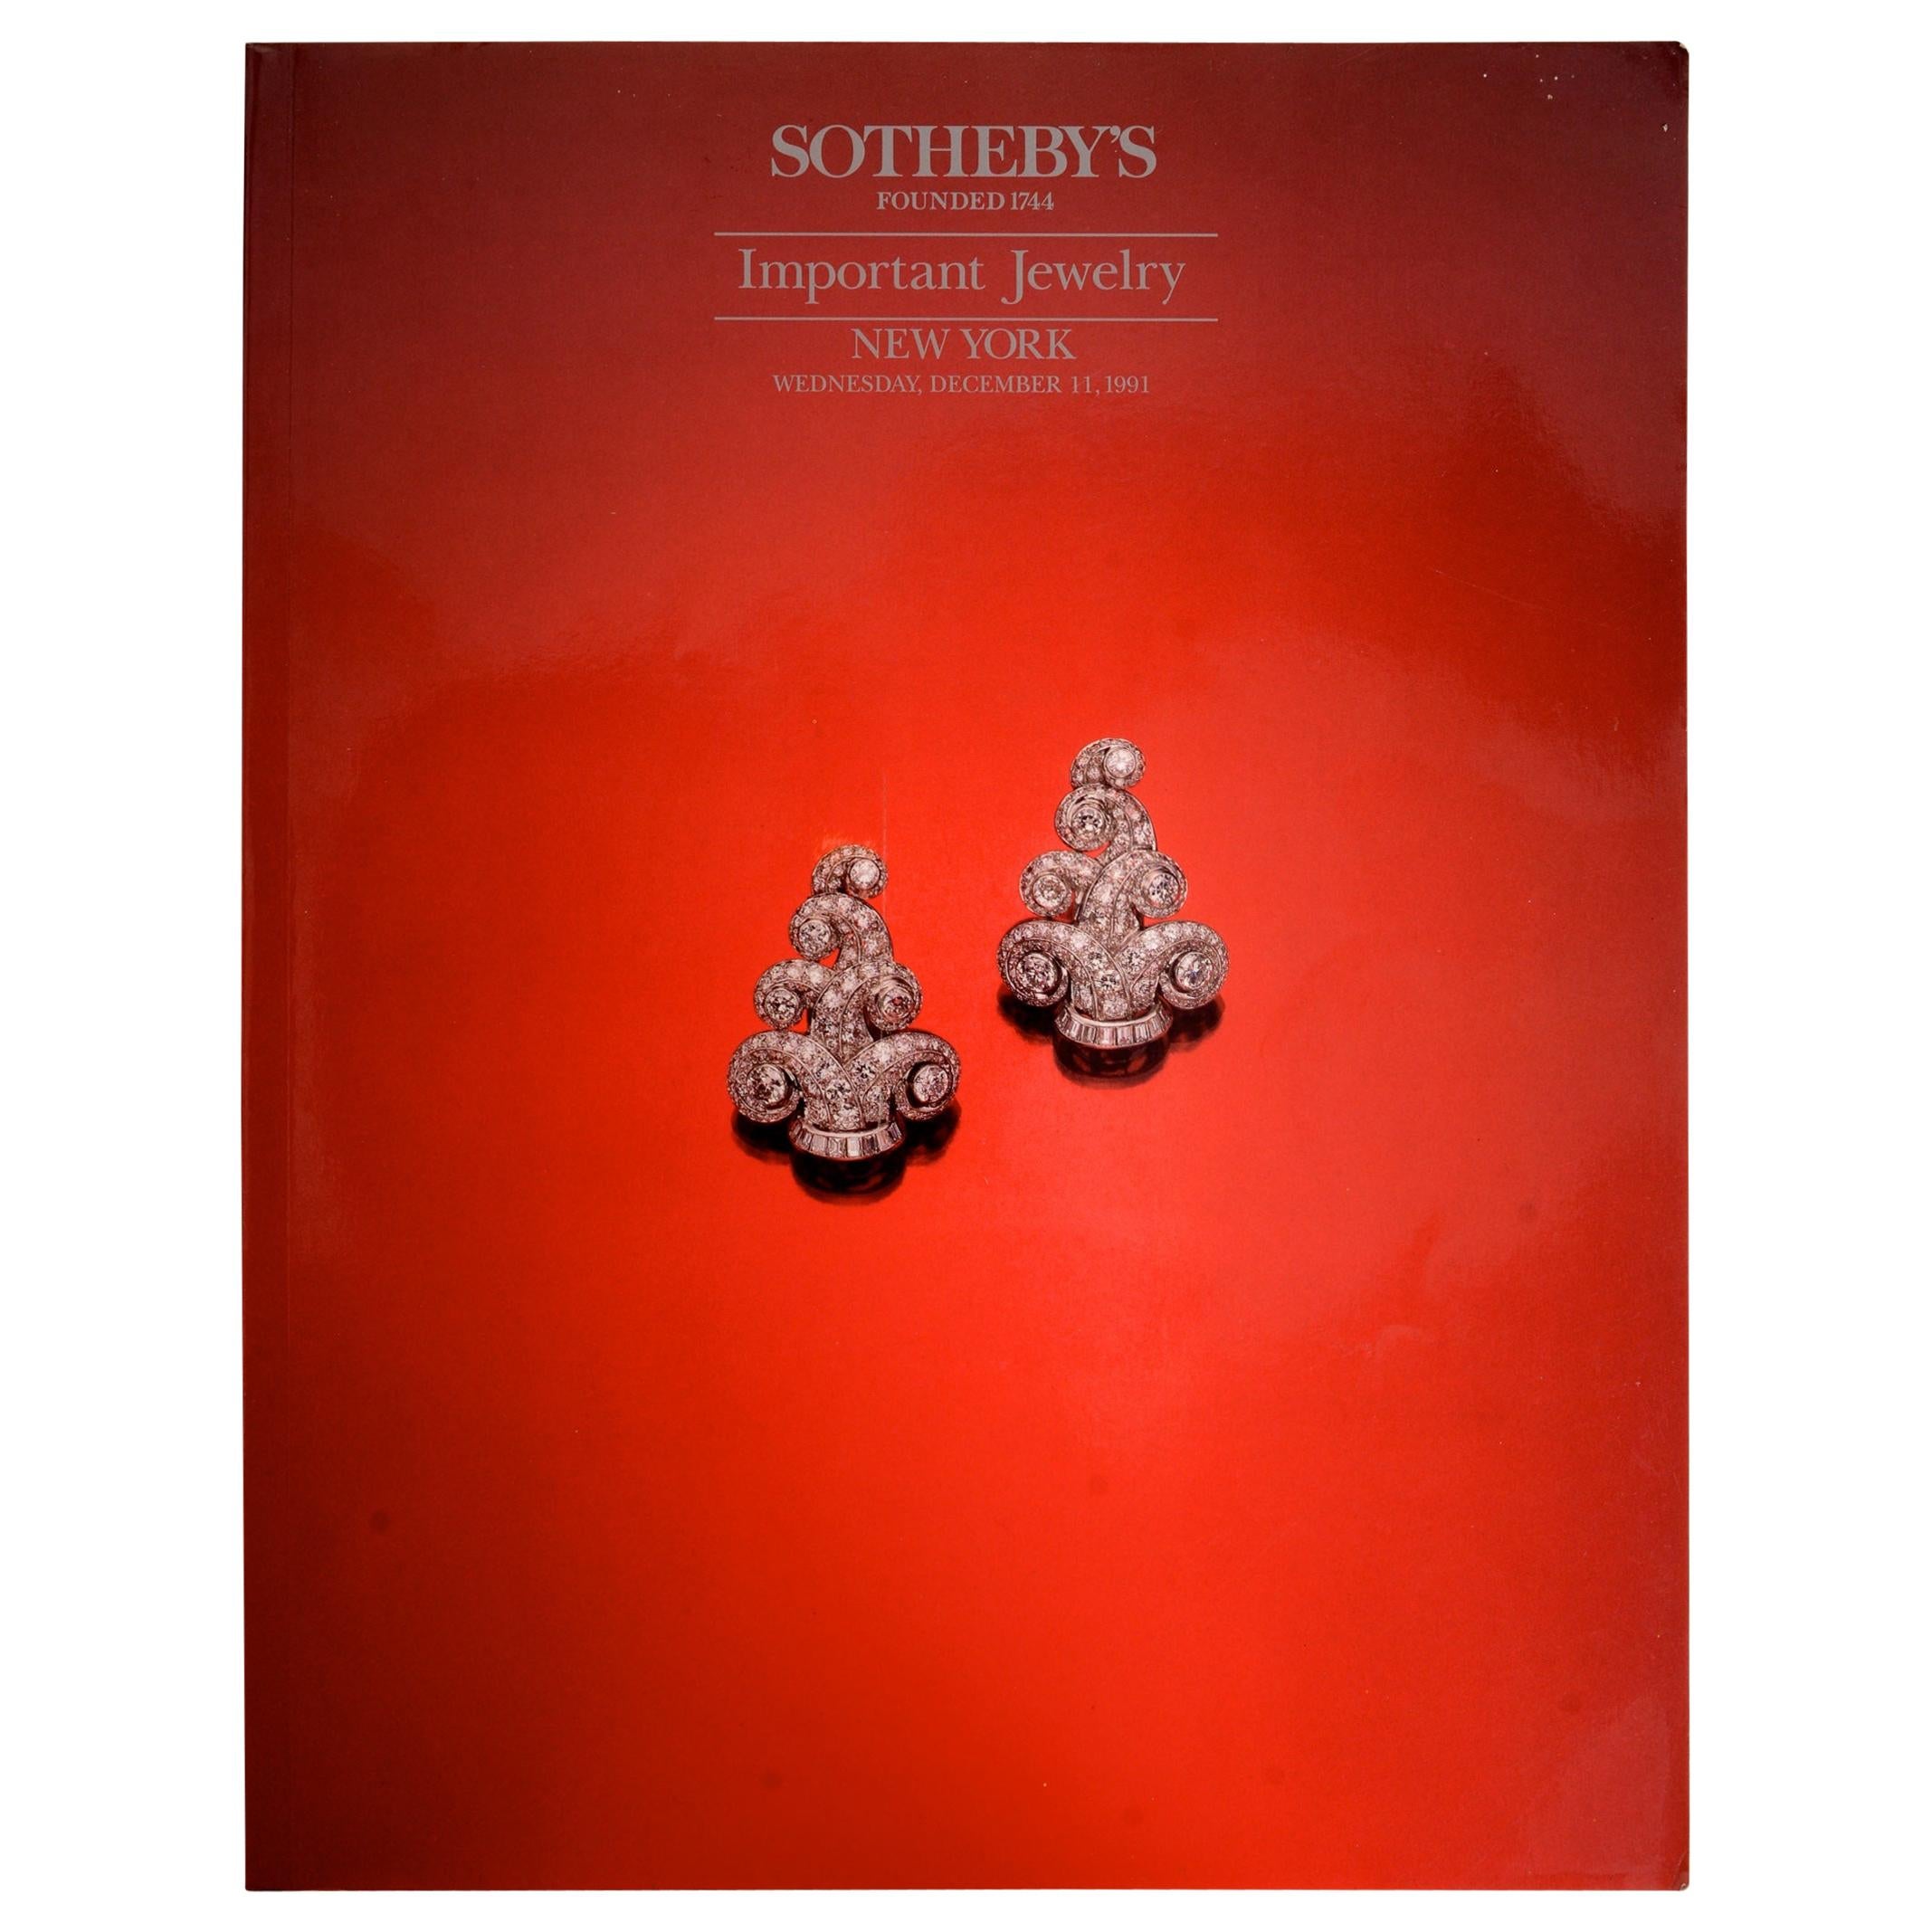 Sotheby's New York Important Jewelry 6254 December 11, 1991, First Edition